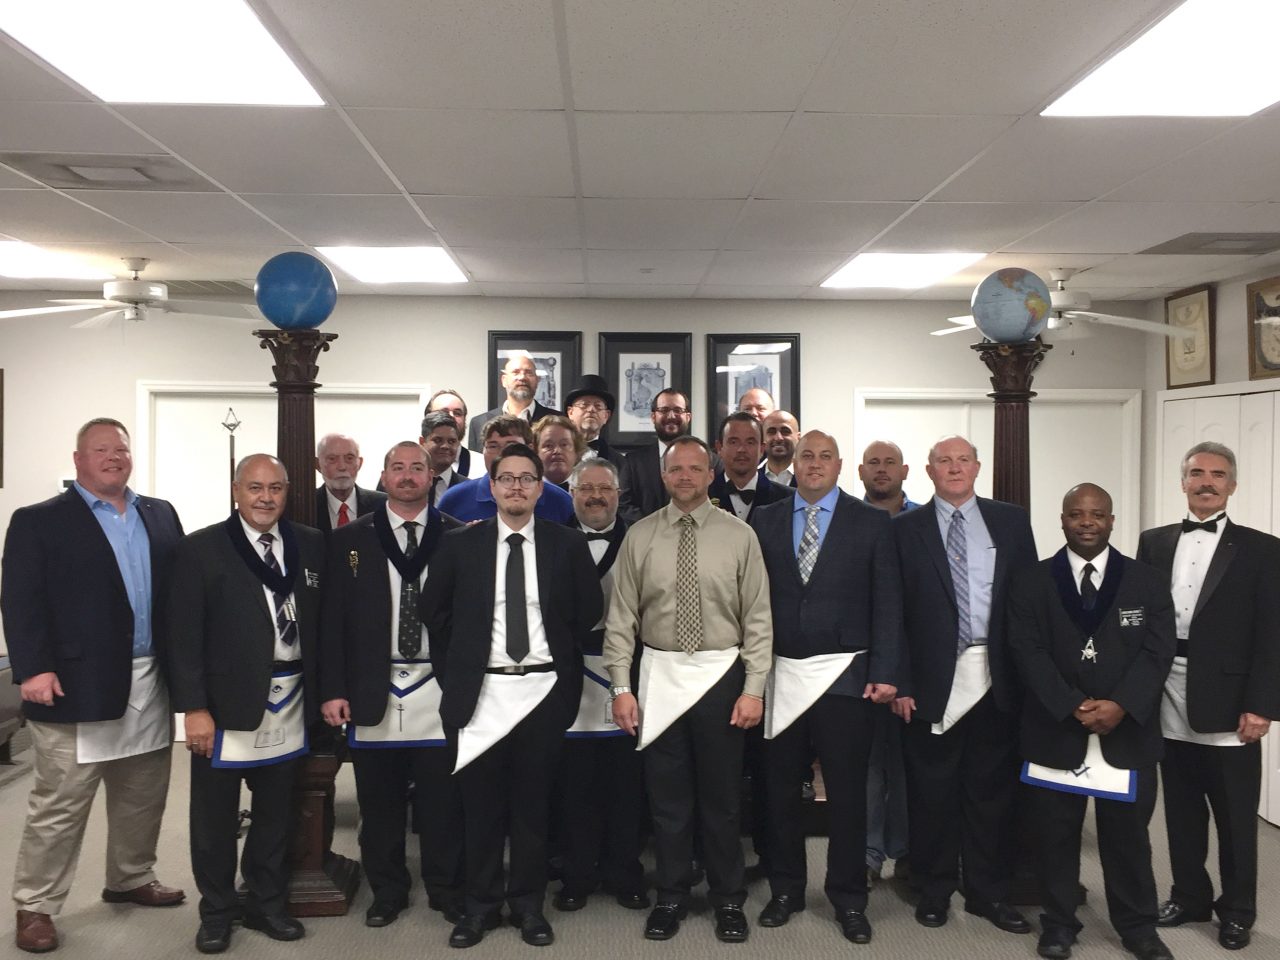 New Fellow Craft Degree Brothers — July 30th, 2018